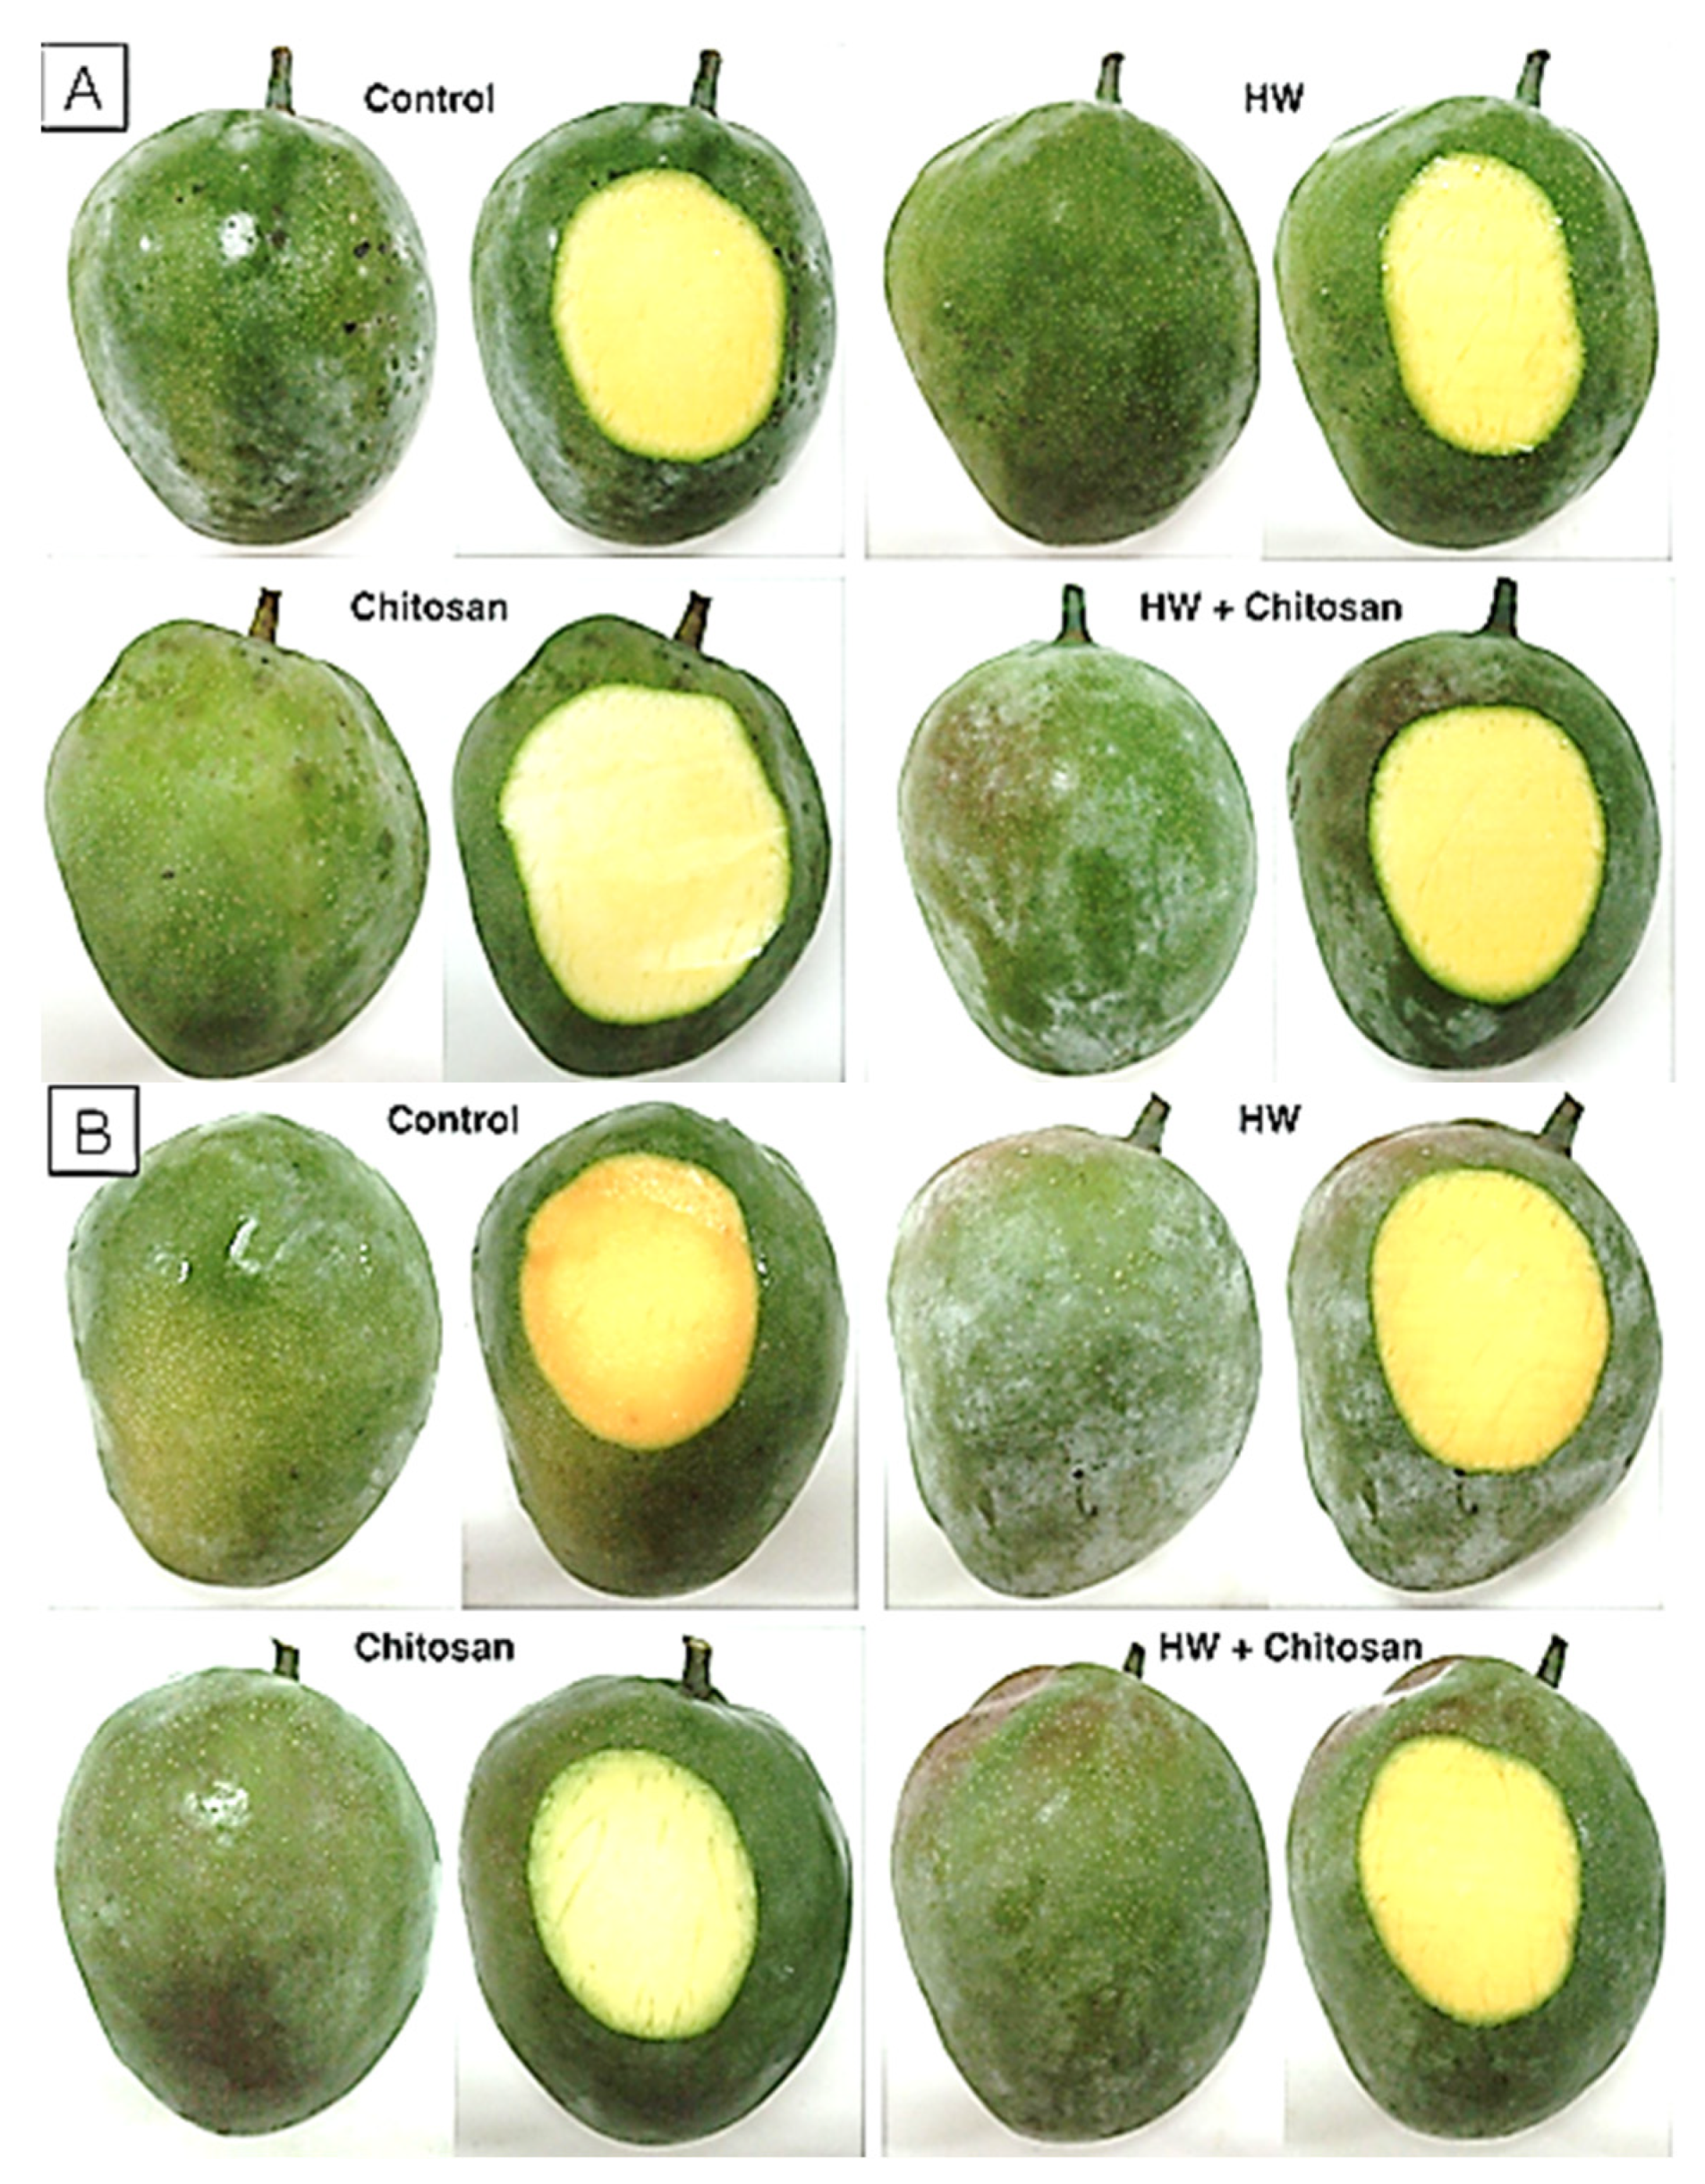 Coatings | Free Full-Text | The Combined Effect of Hot Water Treatment and  Chitosan Coating on Mango (Mangifera indica L. cv. Kent) Fruits to Control  Postharvest Deterioration and Increase Fruit Quality